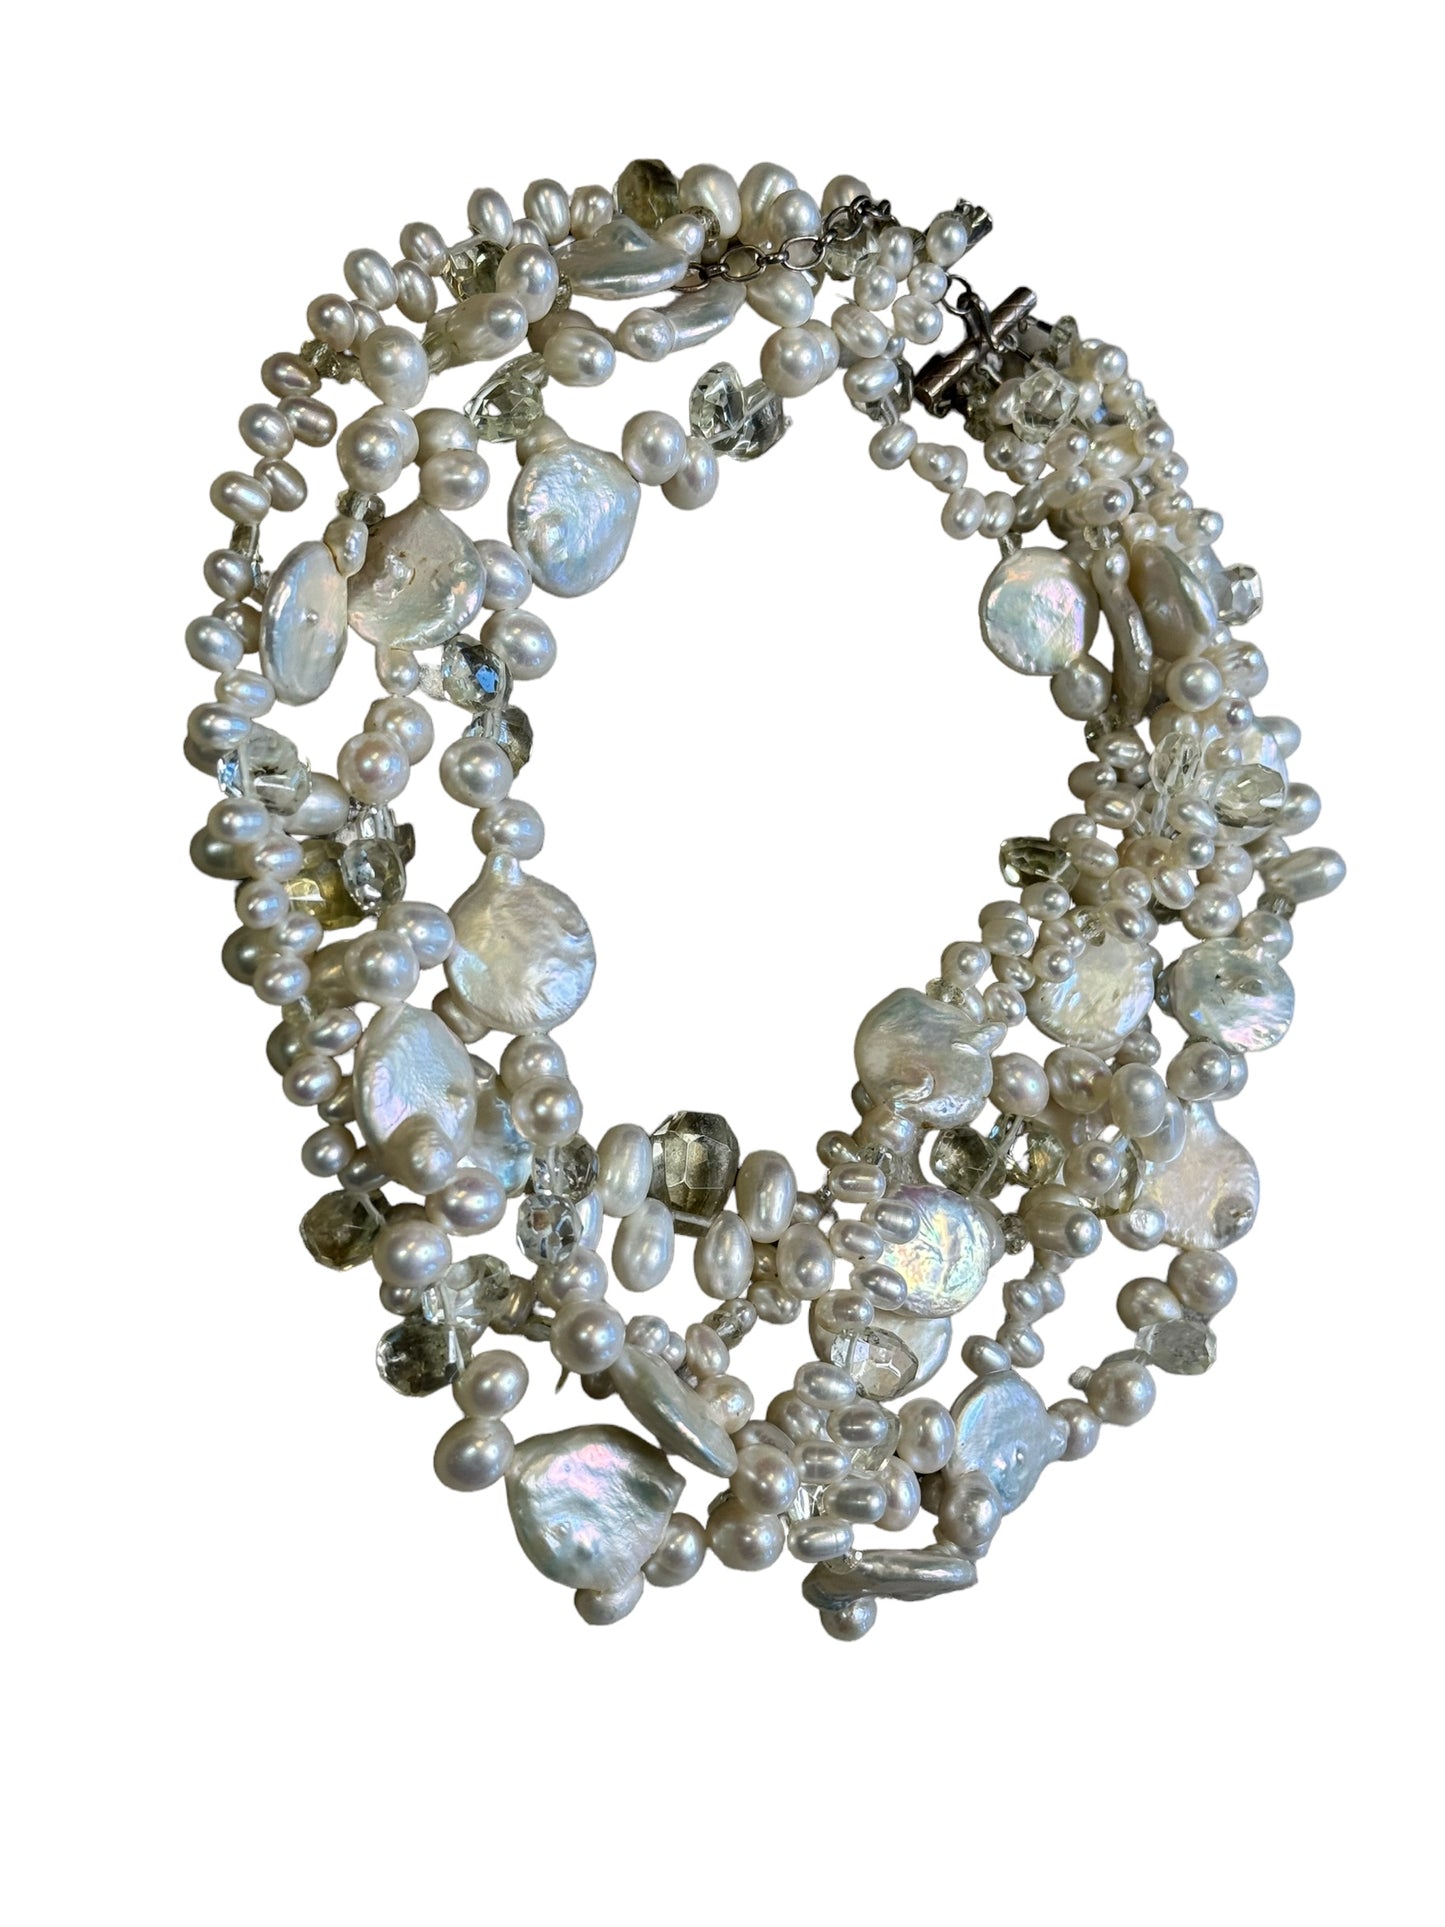 Vintage River Water and Faux Pearl Necklace